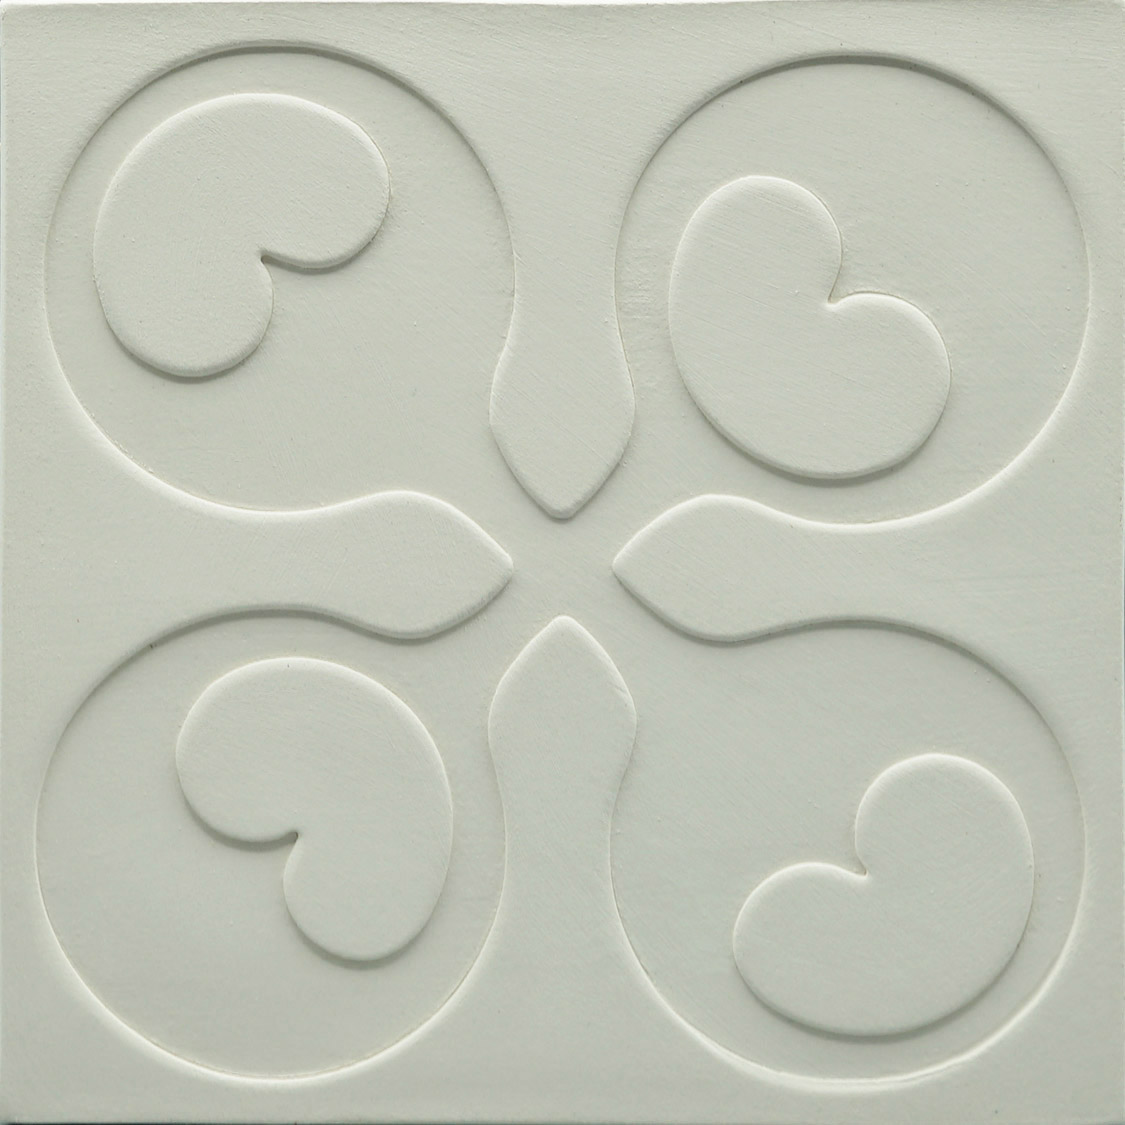 Thumbnail of a four symmetrical connected circles with heart shapes in each quadrant for villa.